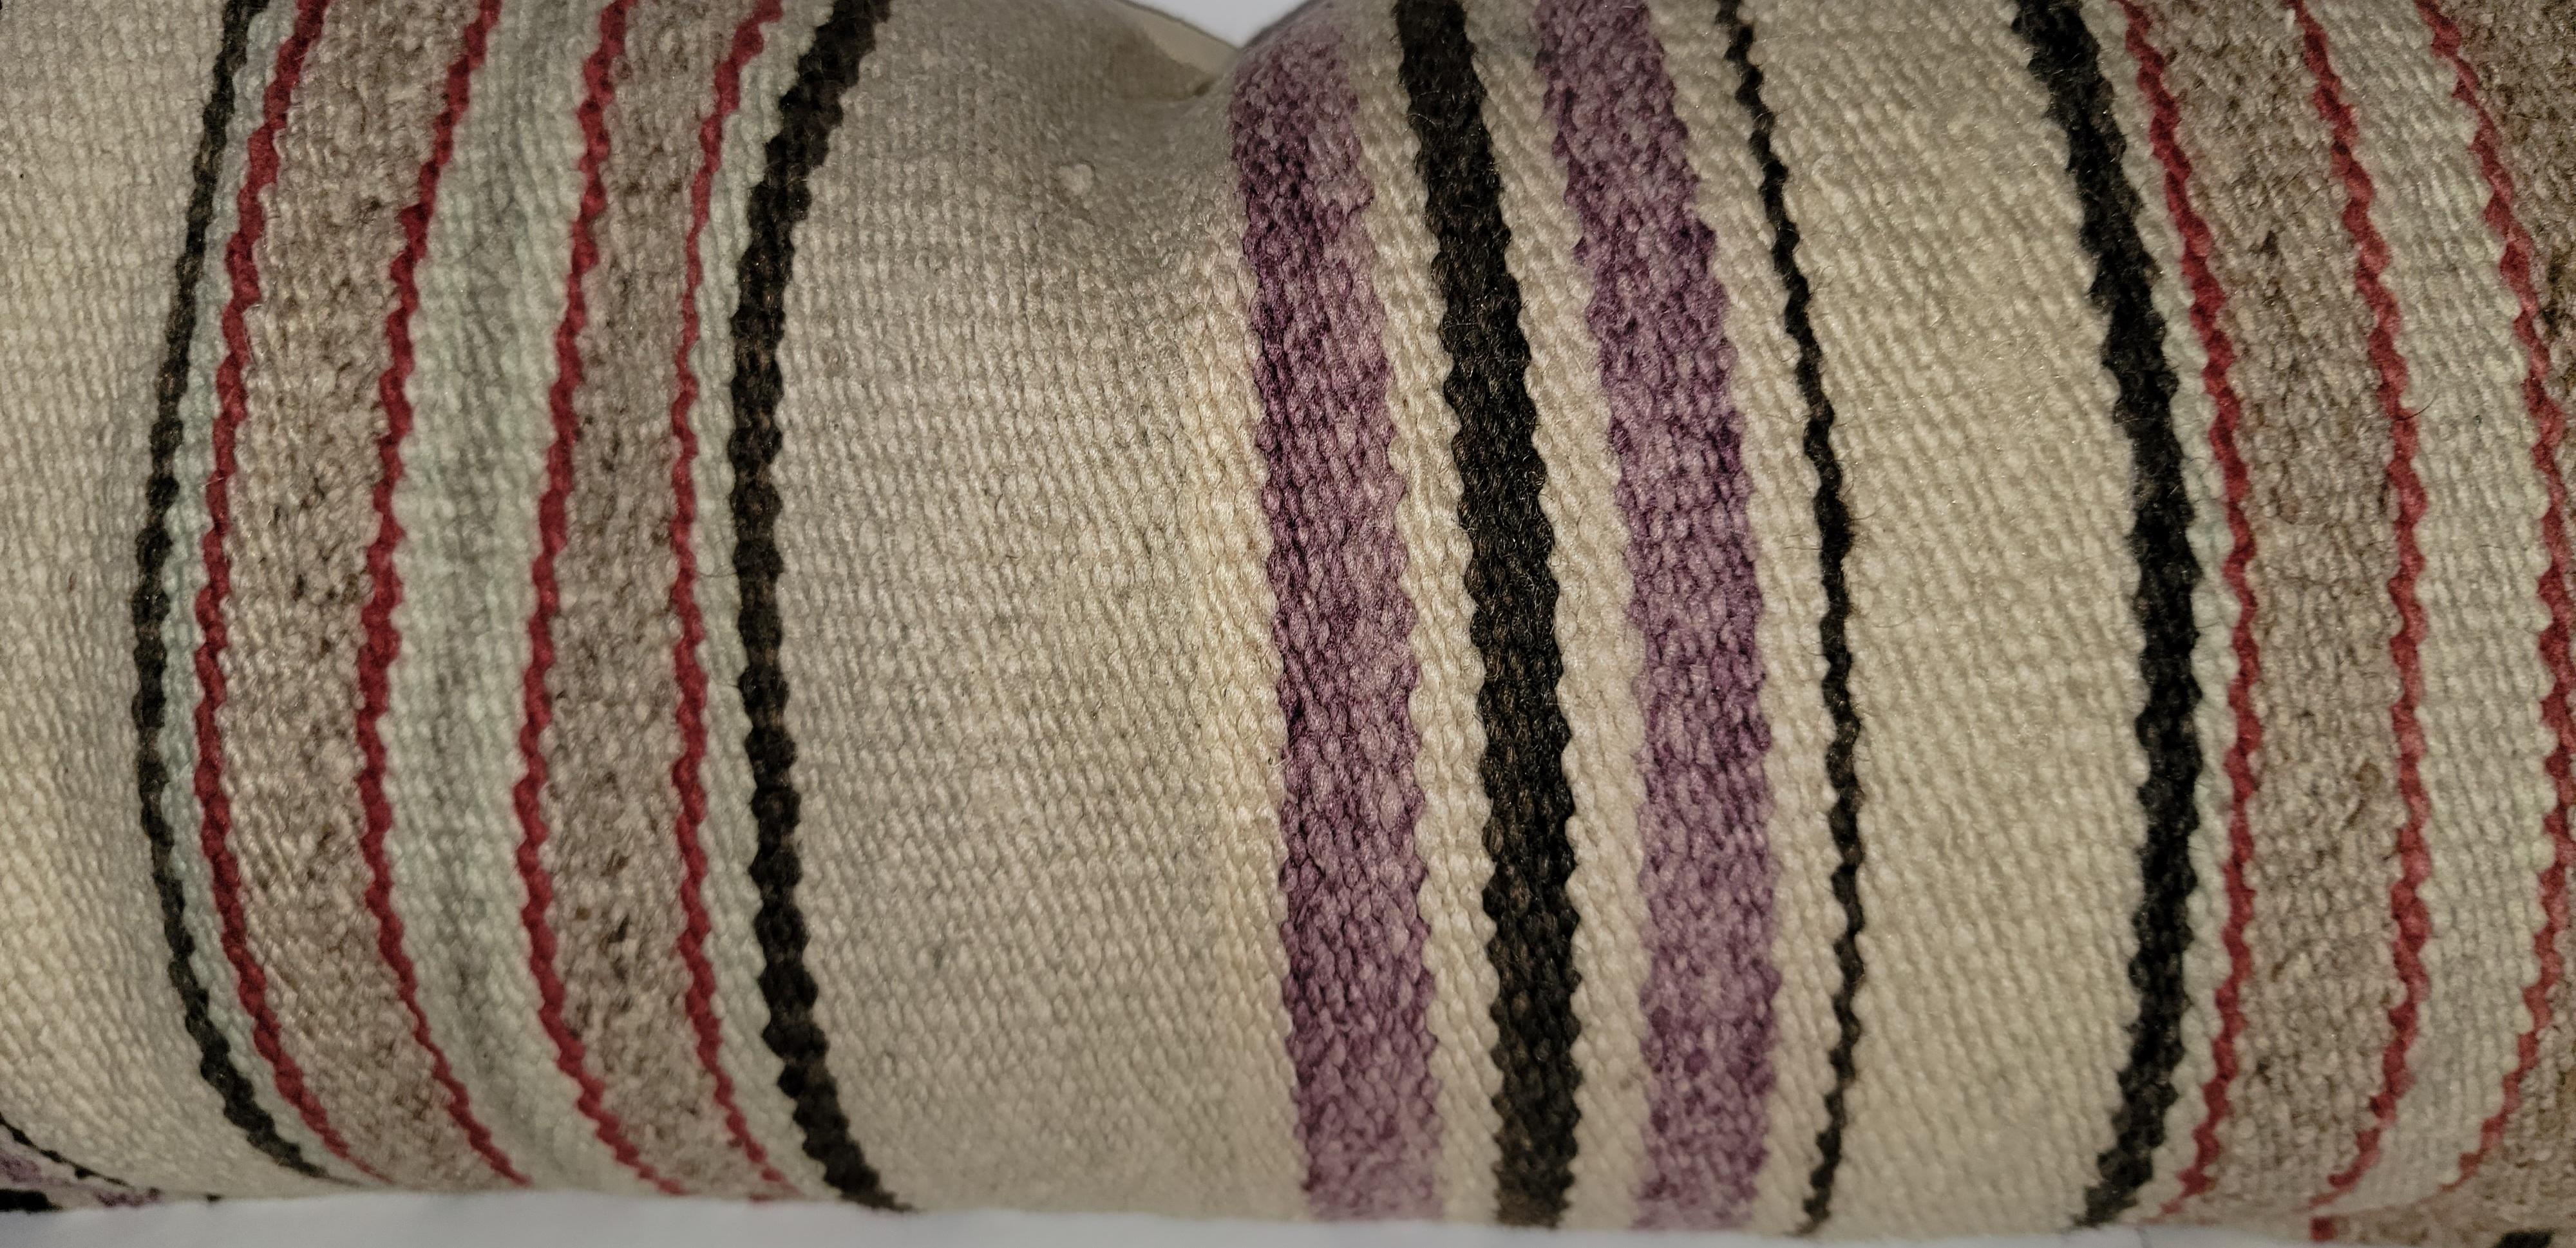 Navajo Indian weaving bolster pillows - pair feather and down insert and zippered case. Colors: Black, off white, tan, and purple.